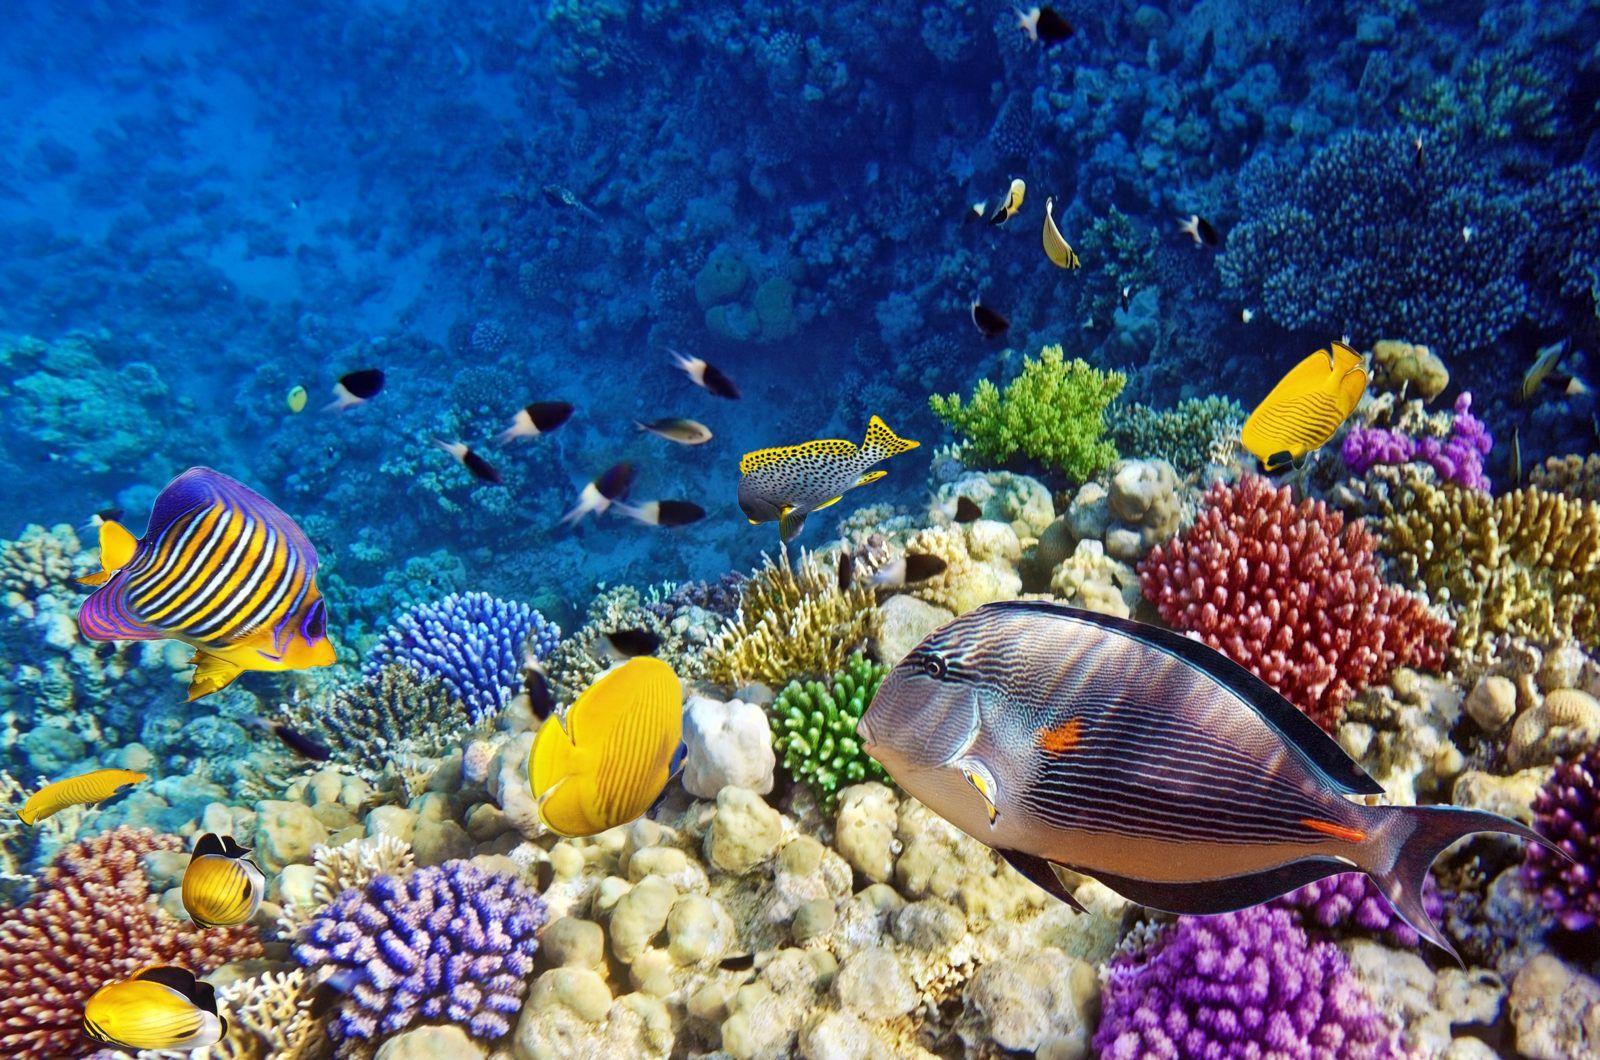 Coral Reef Wallpaper 25141 1600x1060 px